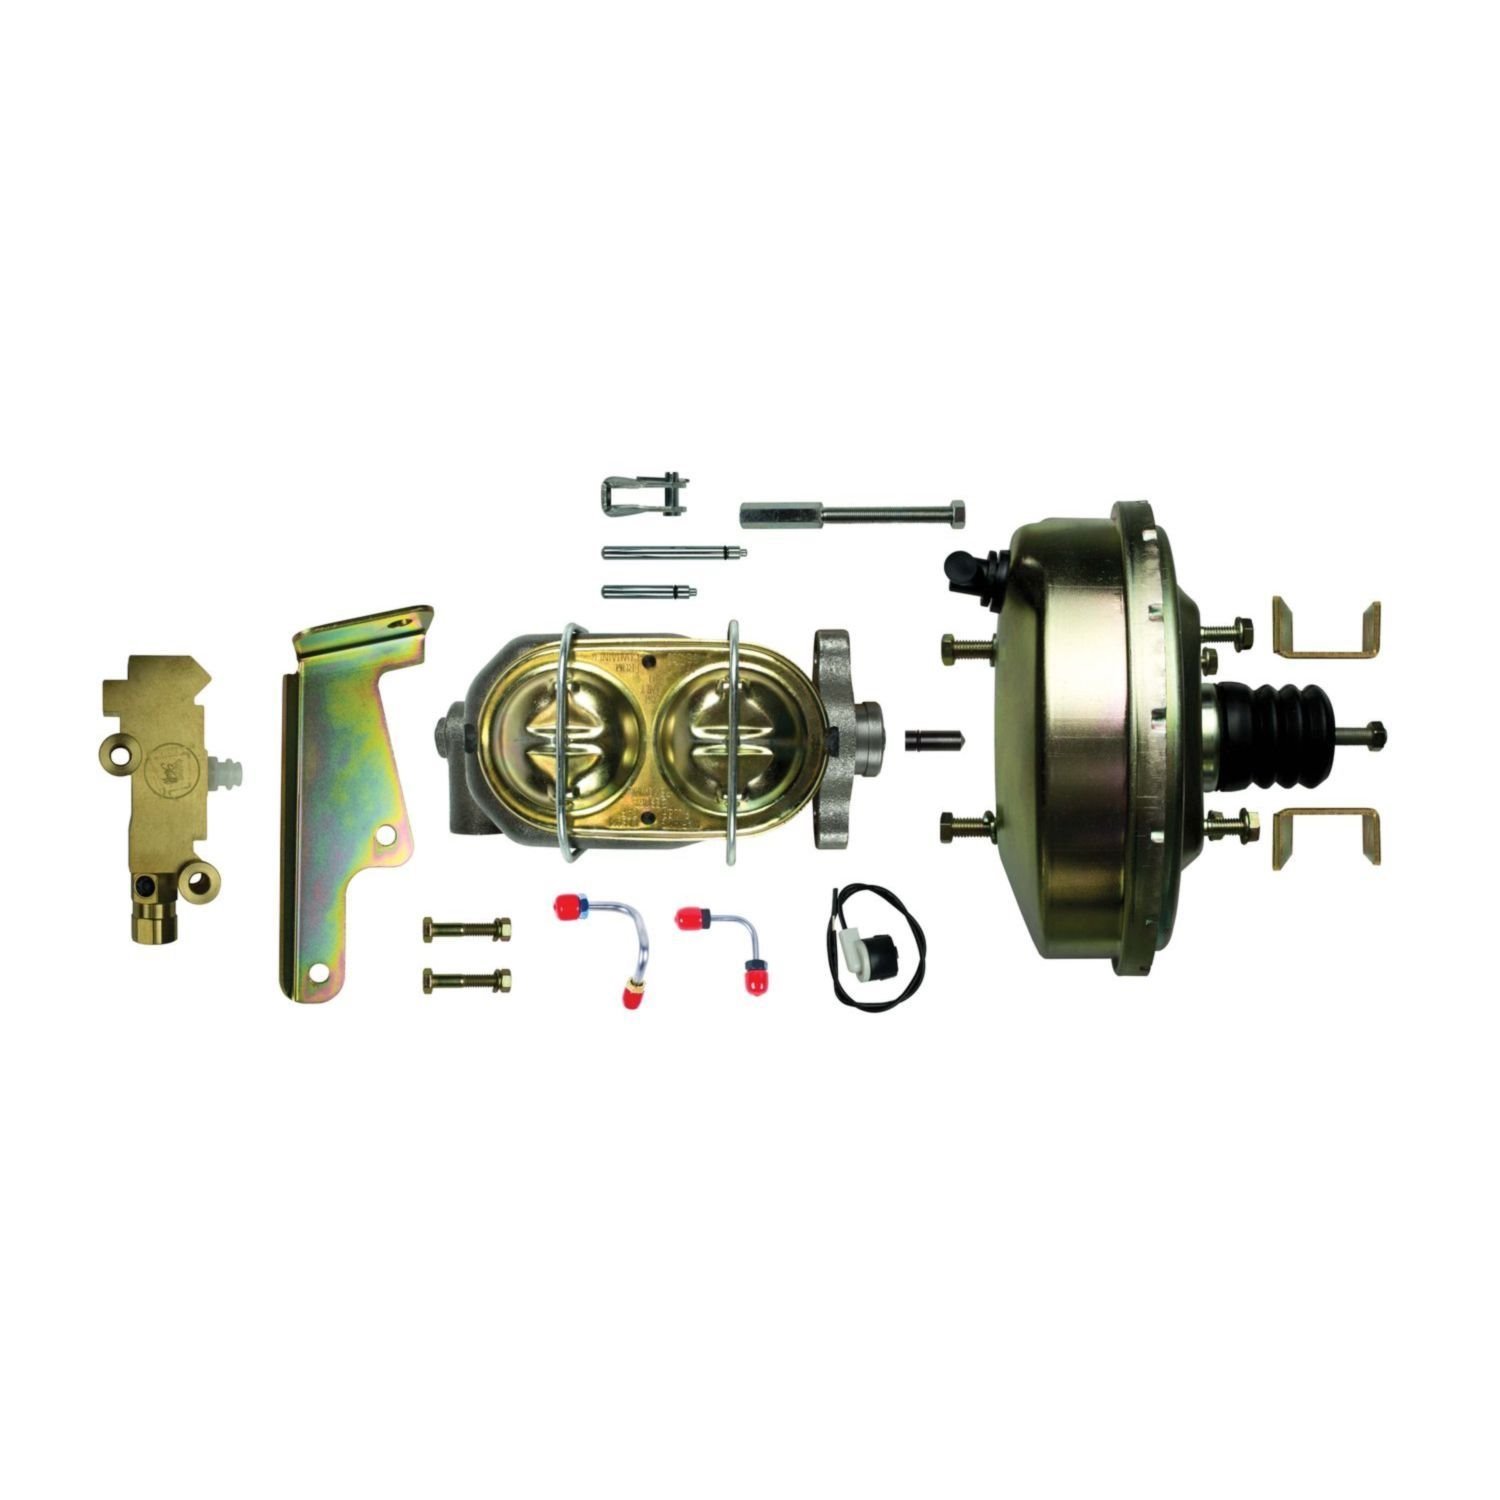 Booster / master Cylinder / valve combo with